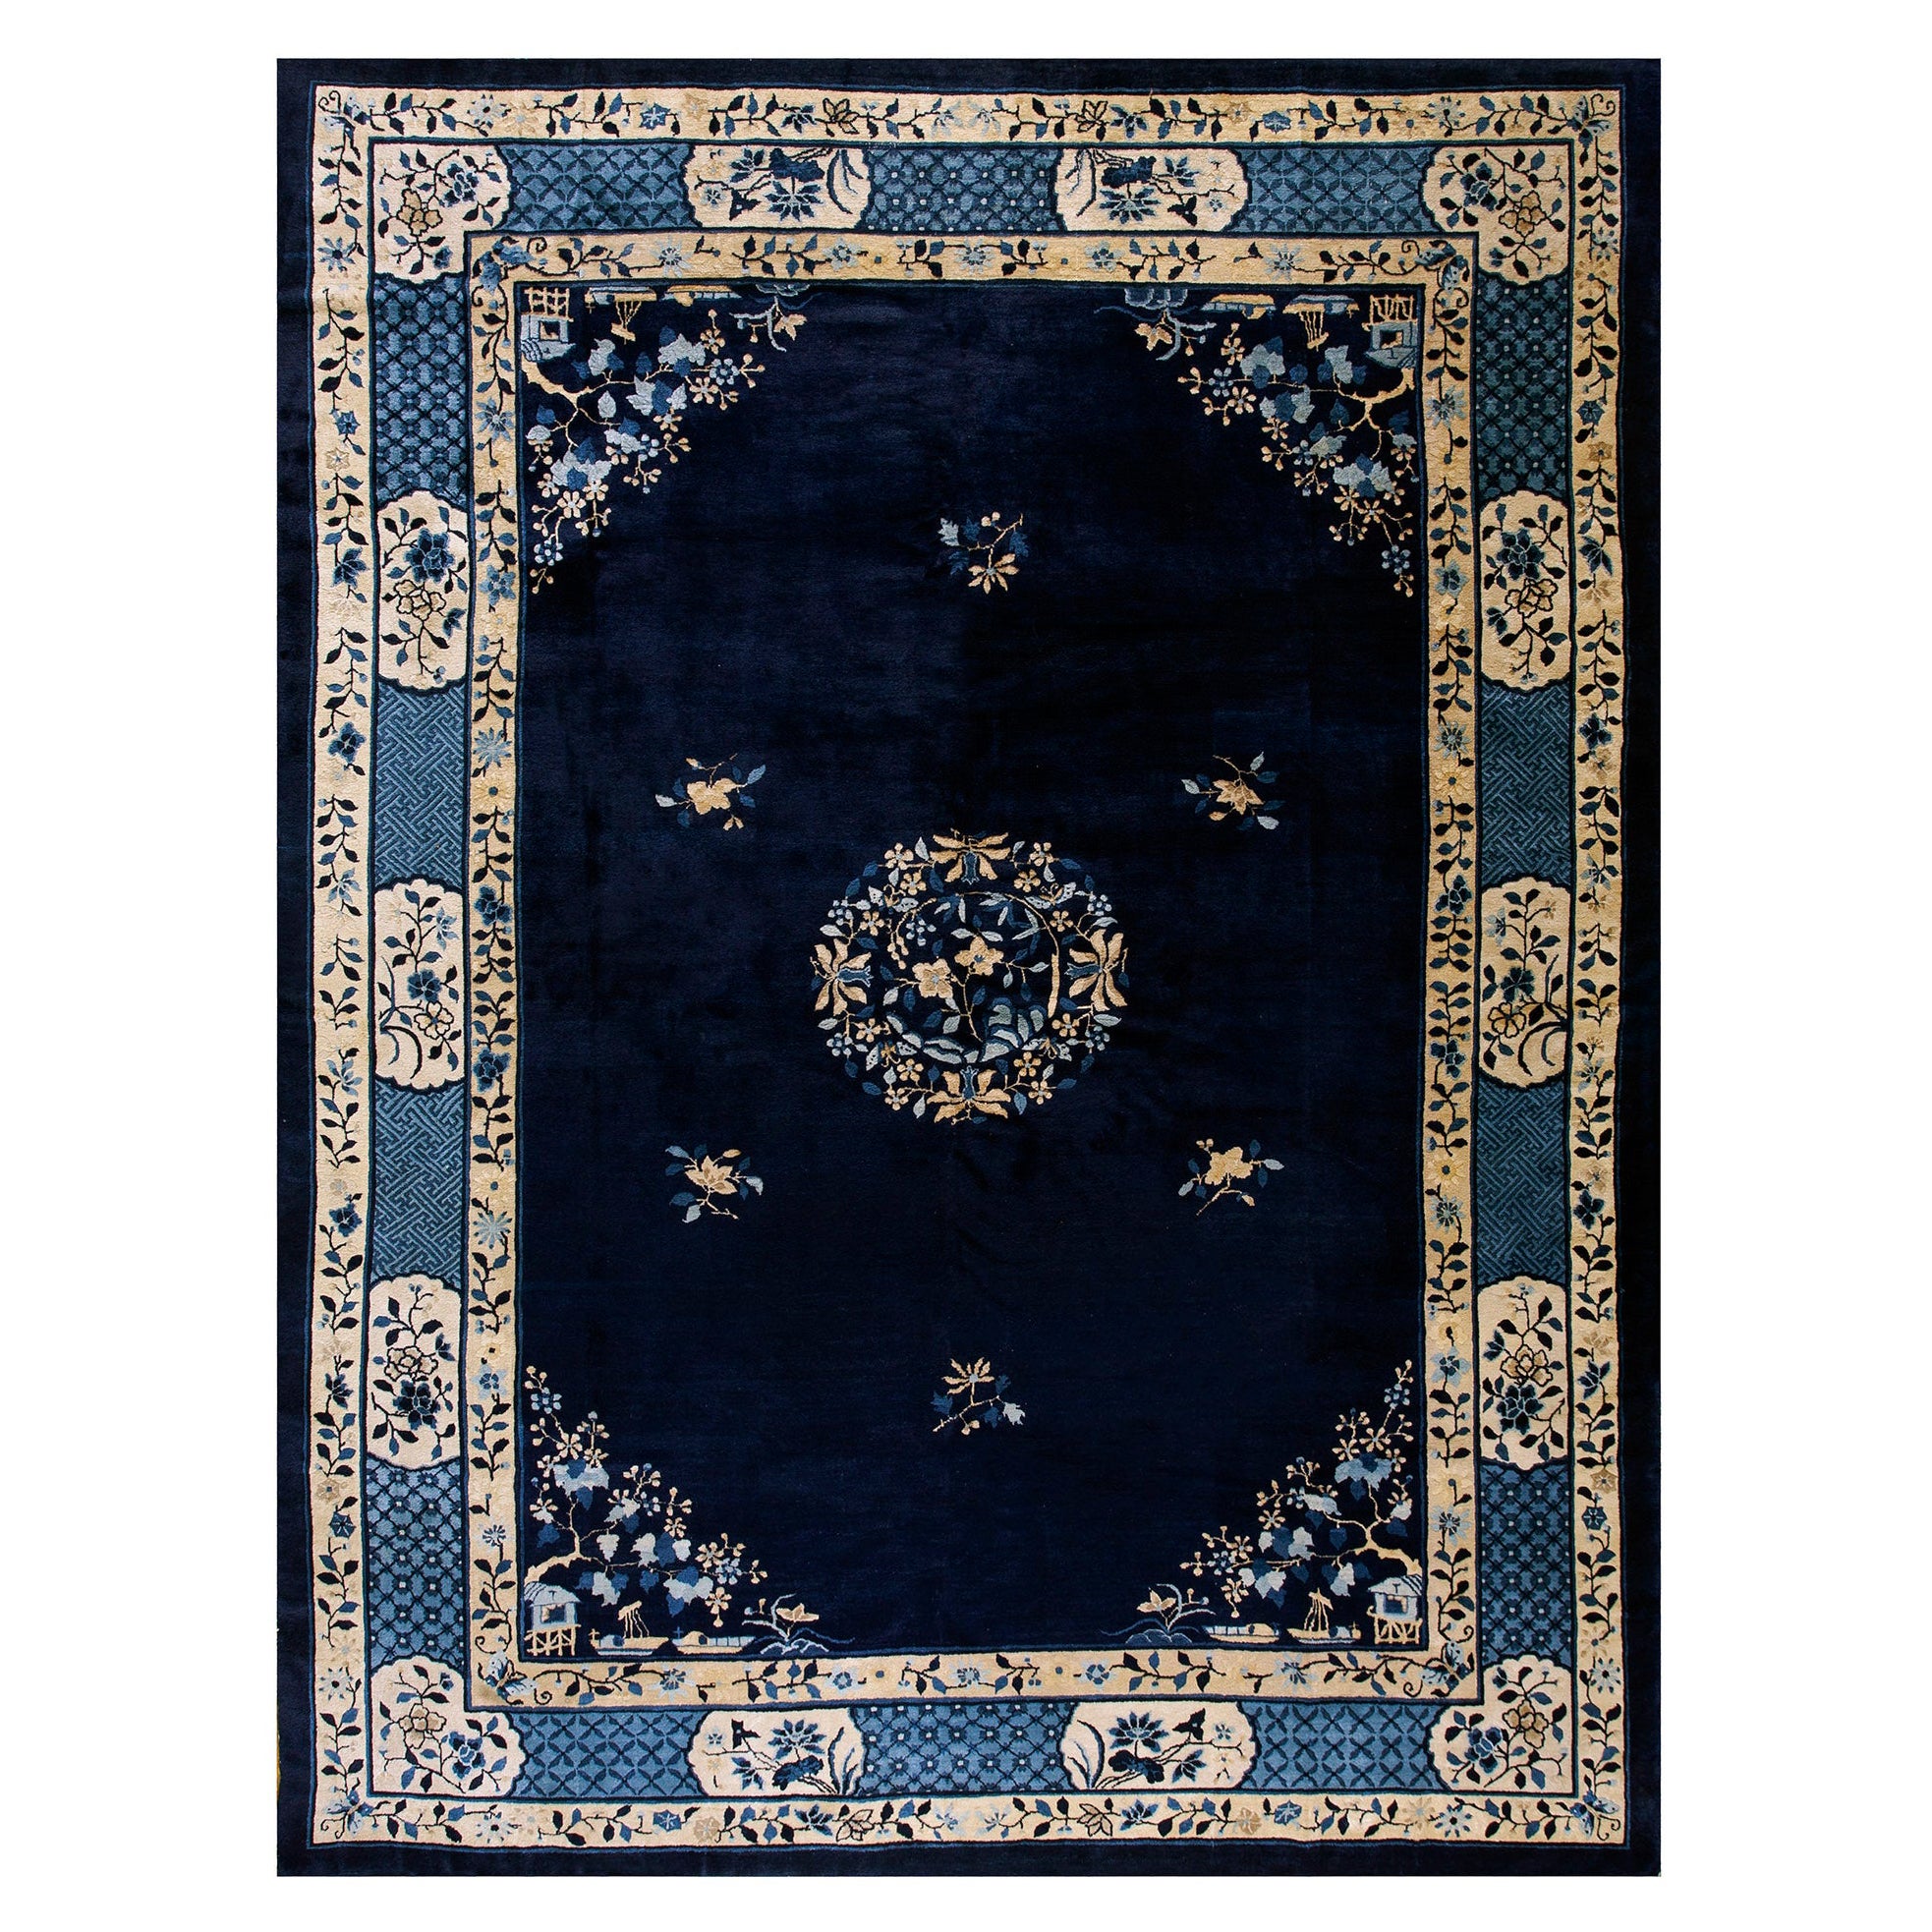 Late 19th Chinese Peking Carpet ( 10'2" x 13'4" - 310 x 405 cm ) For Sale